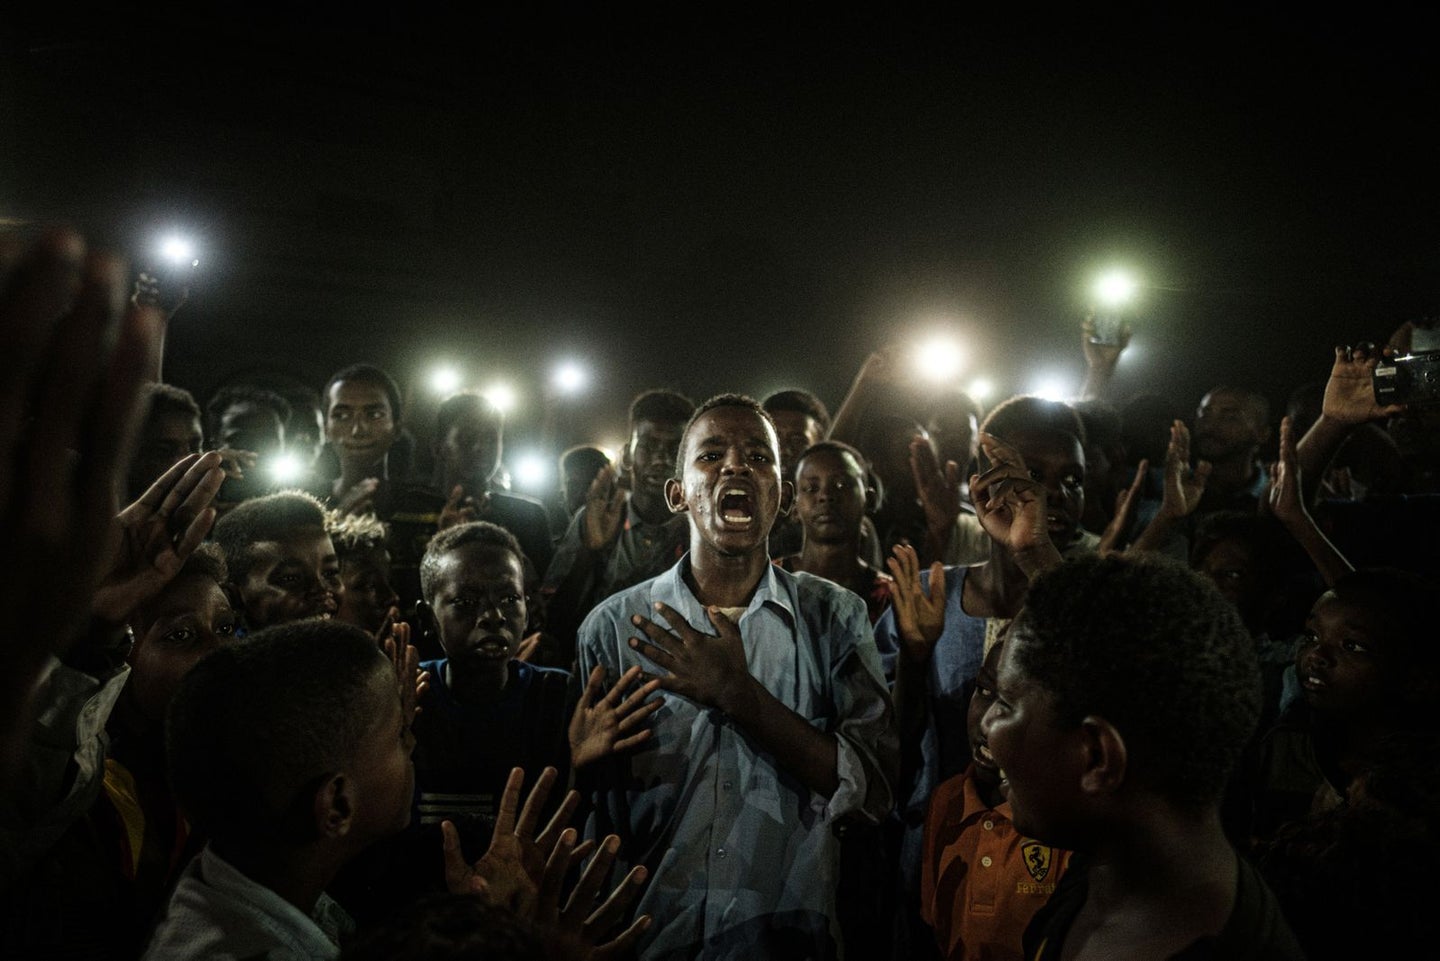 A young man, illuminated by mobile phones, recites protest poetry while demonstrators chant slogans calling for civilian rule, during a blackout in Khartoum, Sudan, on 19 June.